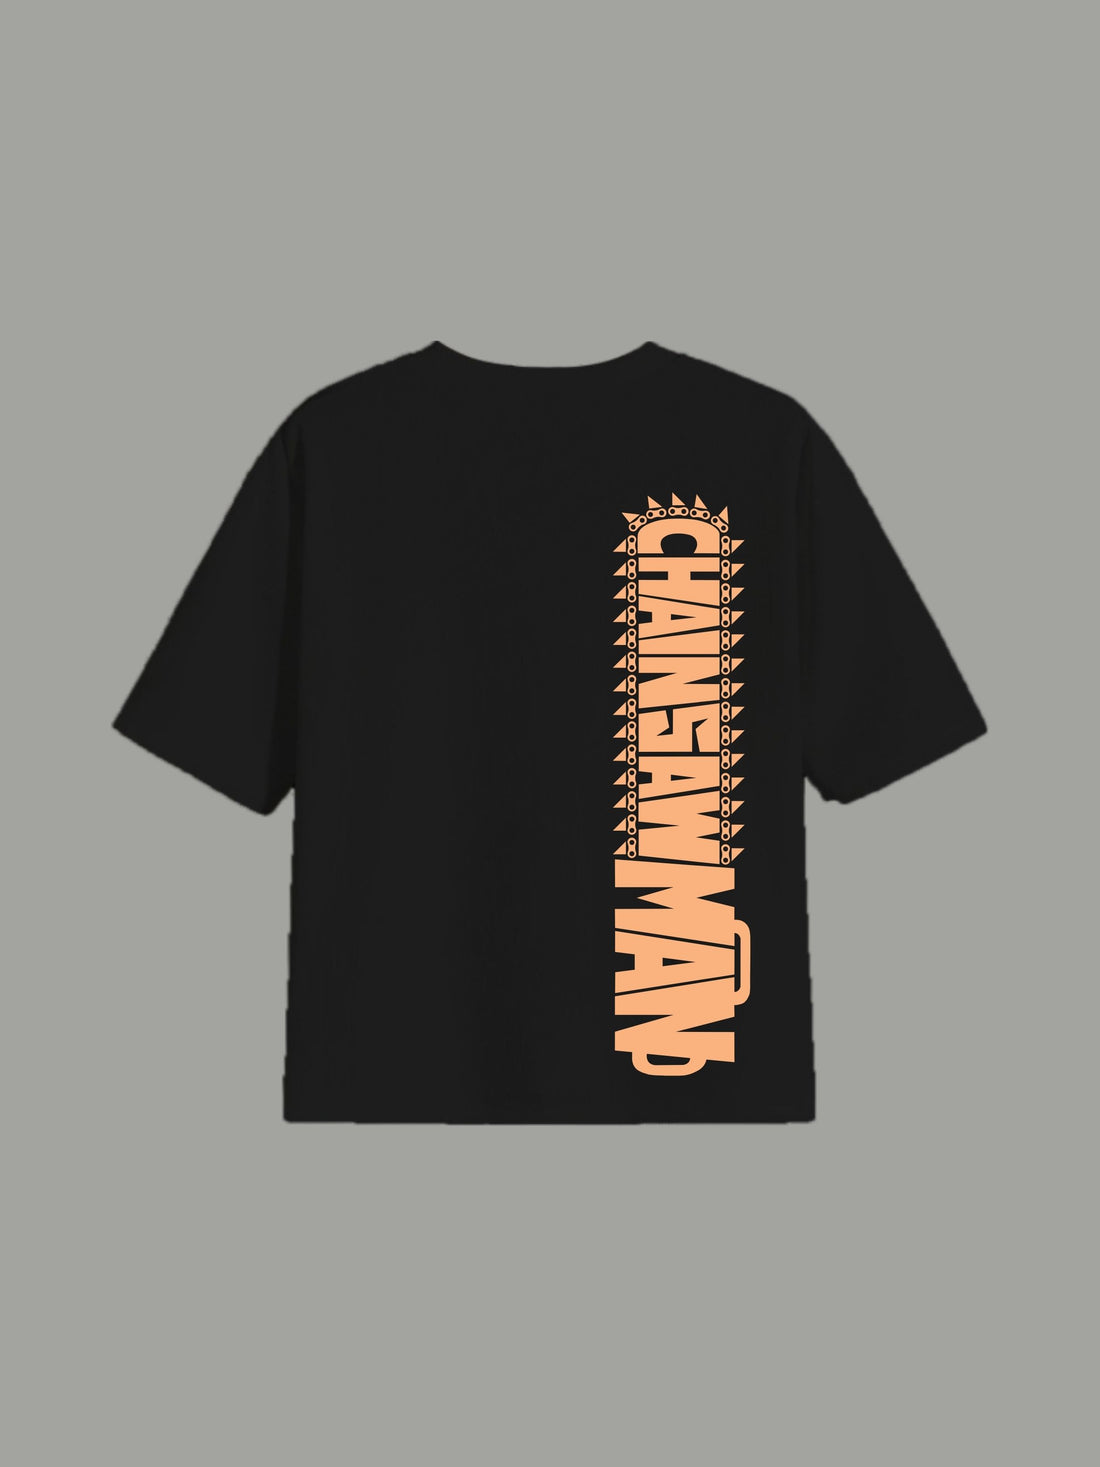 Makima - Chainsawman Glow In Dark Drop Sleeved  Tee For Men and Women